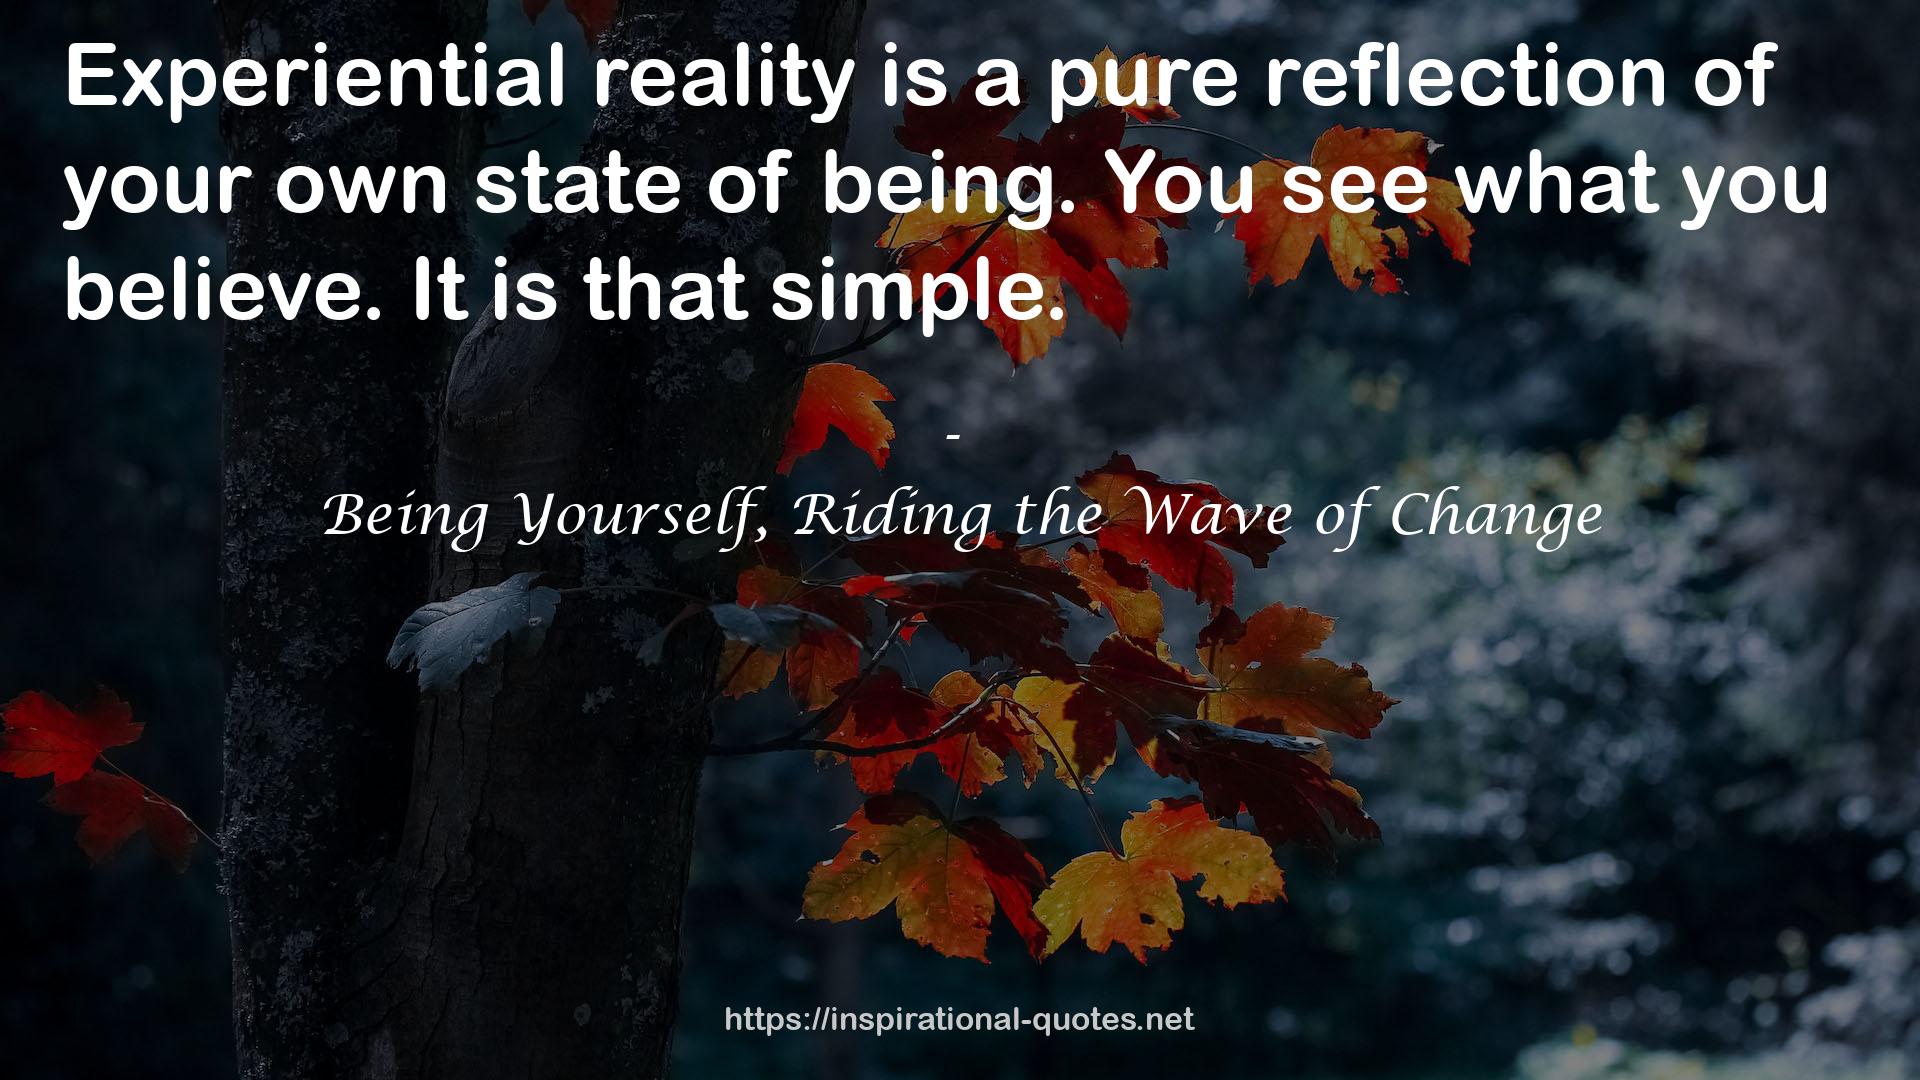 Being Yourself, Riding the Wave of Change QUOTES